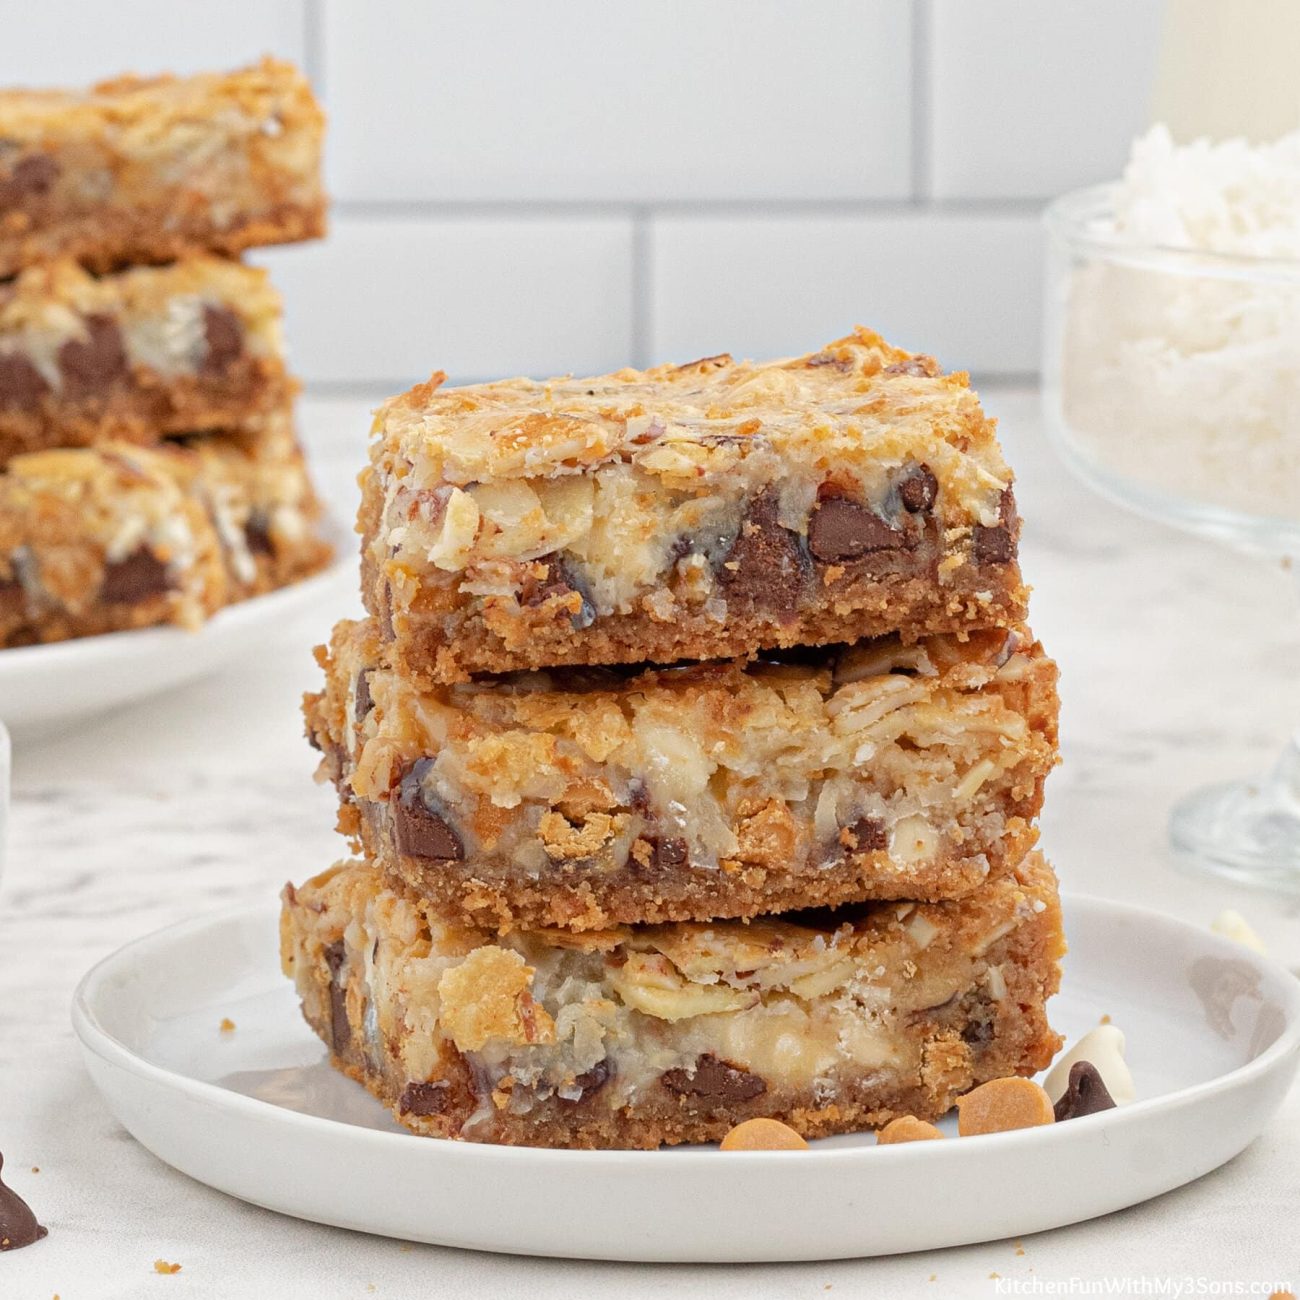 Another variation of those famous magic layer bars